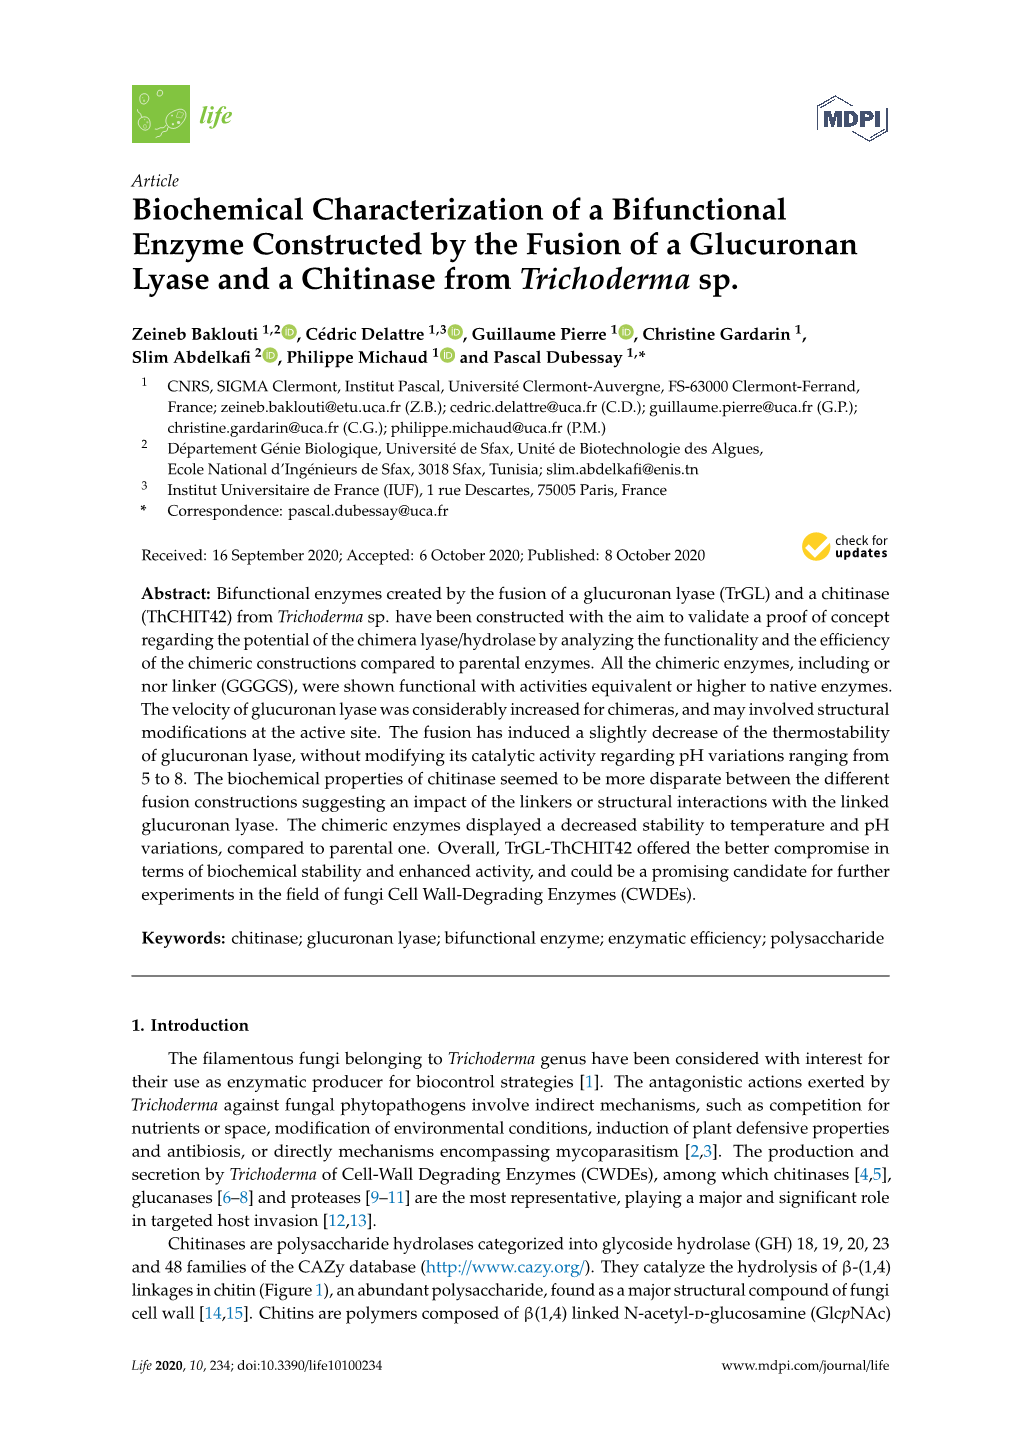 Biochemical Characterization of a Bifunctional Enzyme Constructed by the Fusion of a Glucuronan Lyase and a Chitinase from Trichoderma Sp